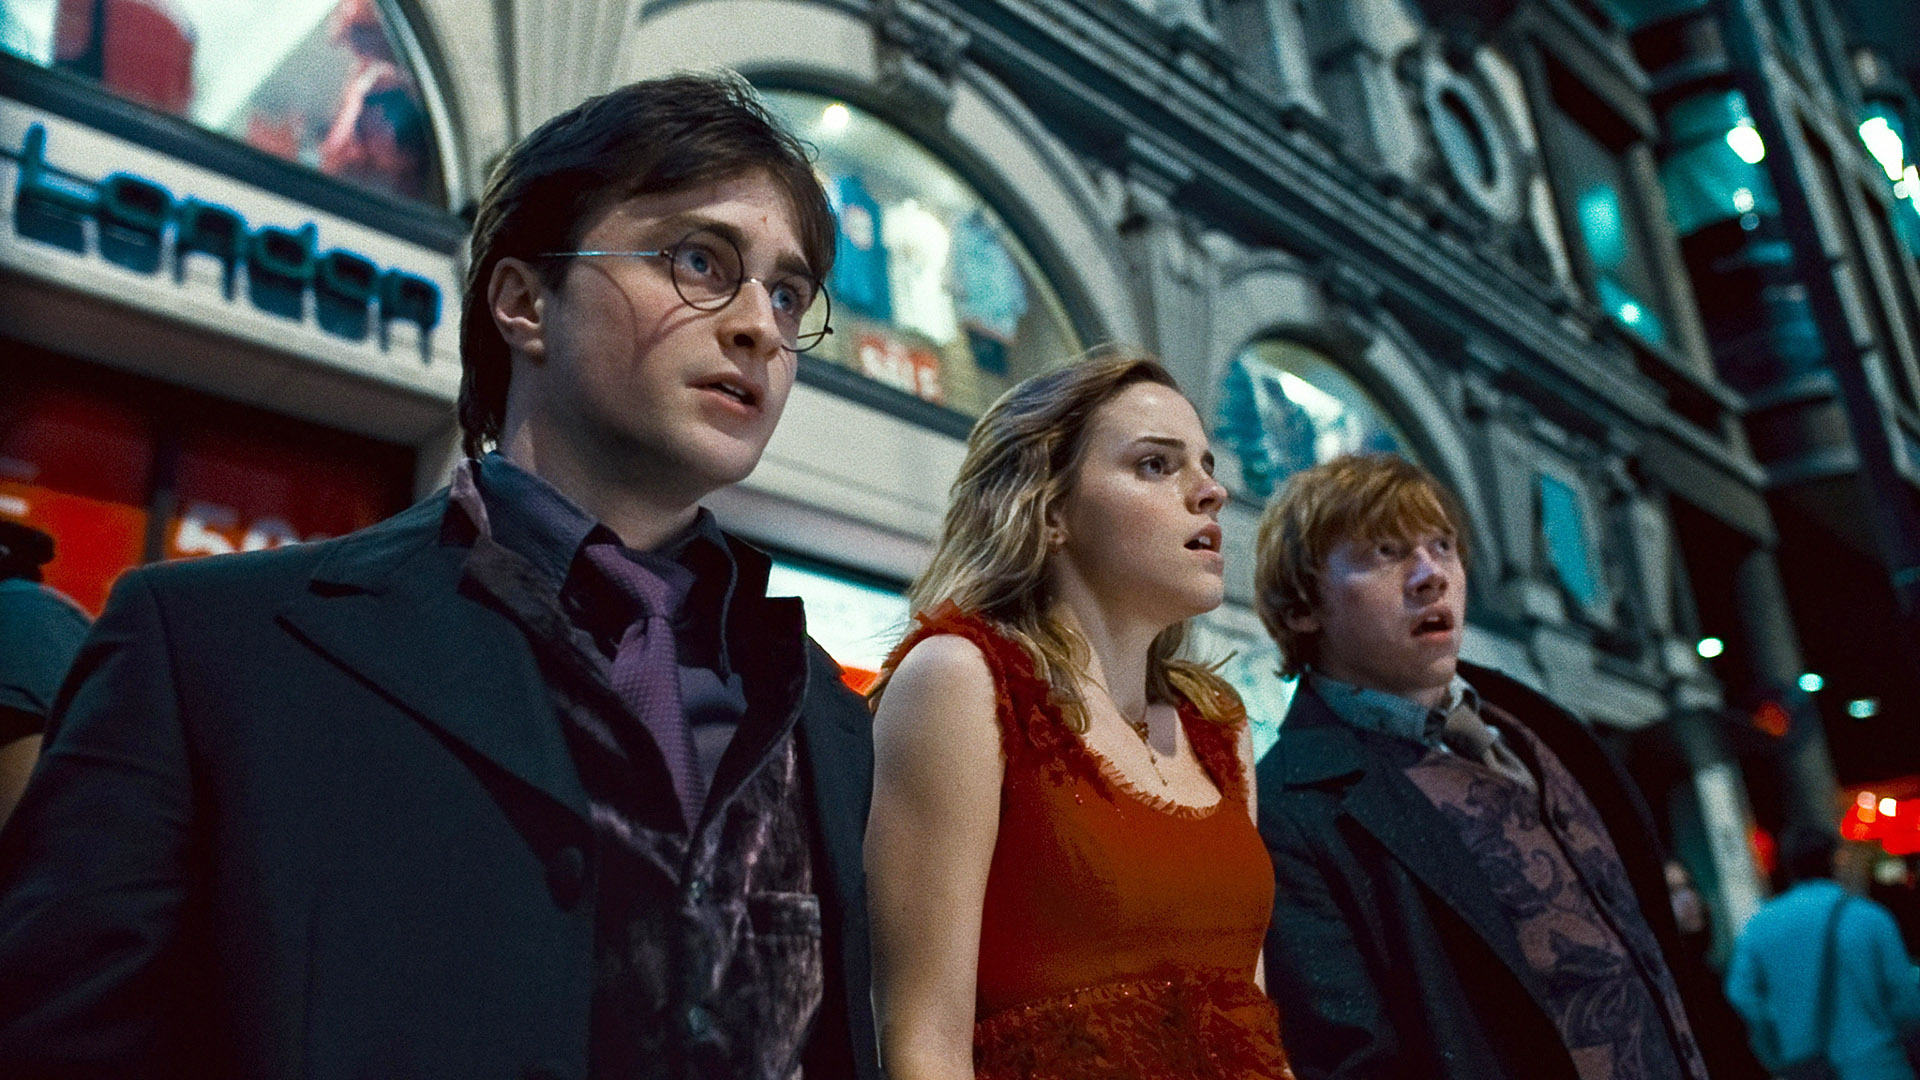 10 Biggest Harry Potter Plotholes That Still Irritate Fans, Ranked From Least to Most Ridiculous